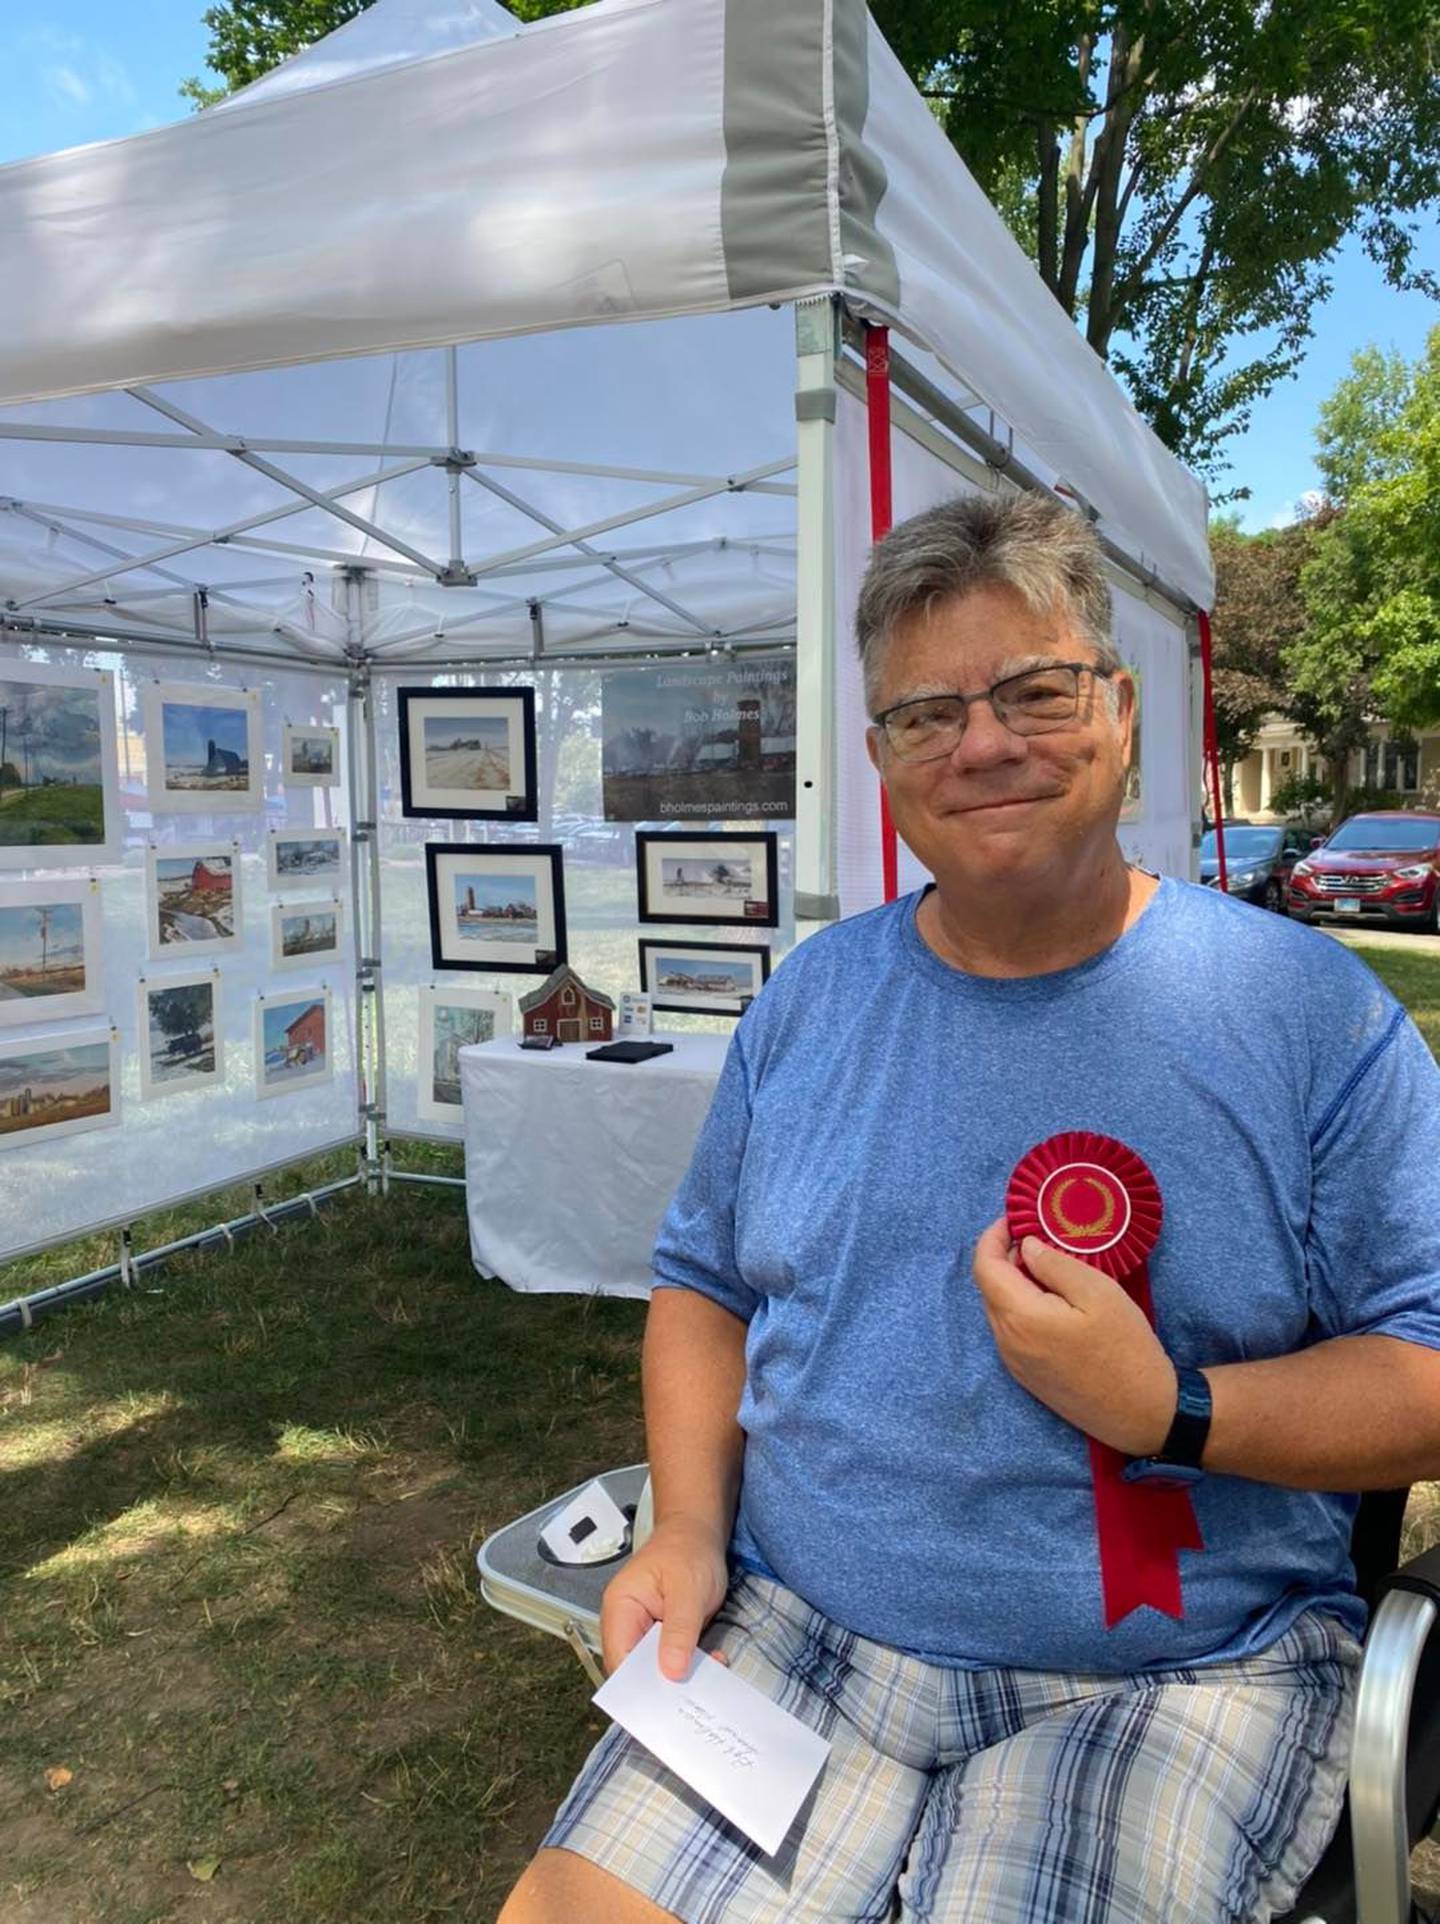 Bob Holmes received second place honors at the 2022 Art in the Park show at Washington Square in Ottawa.